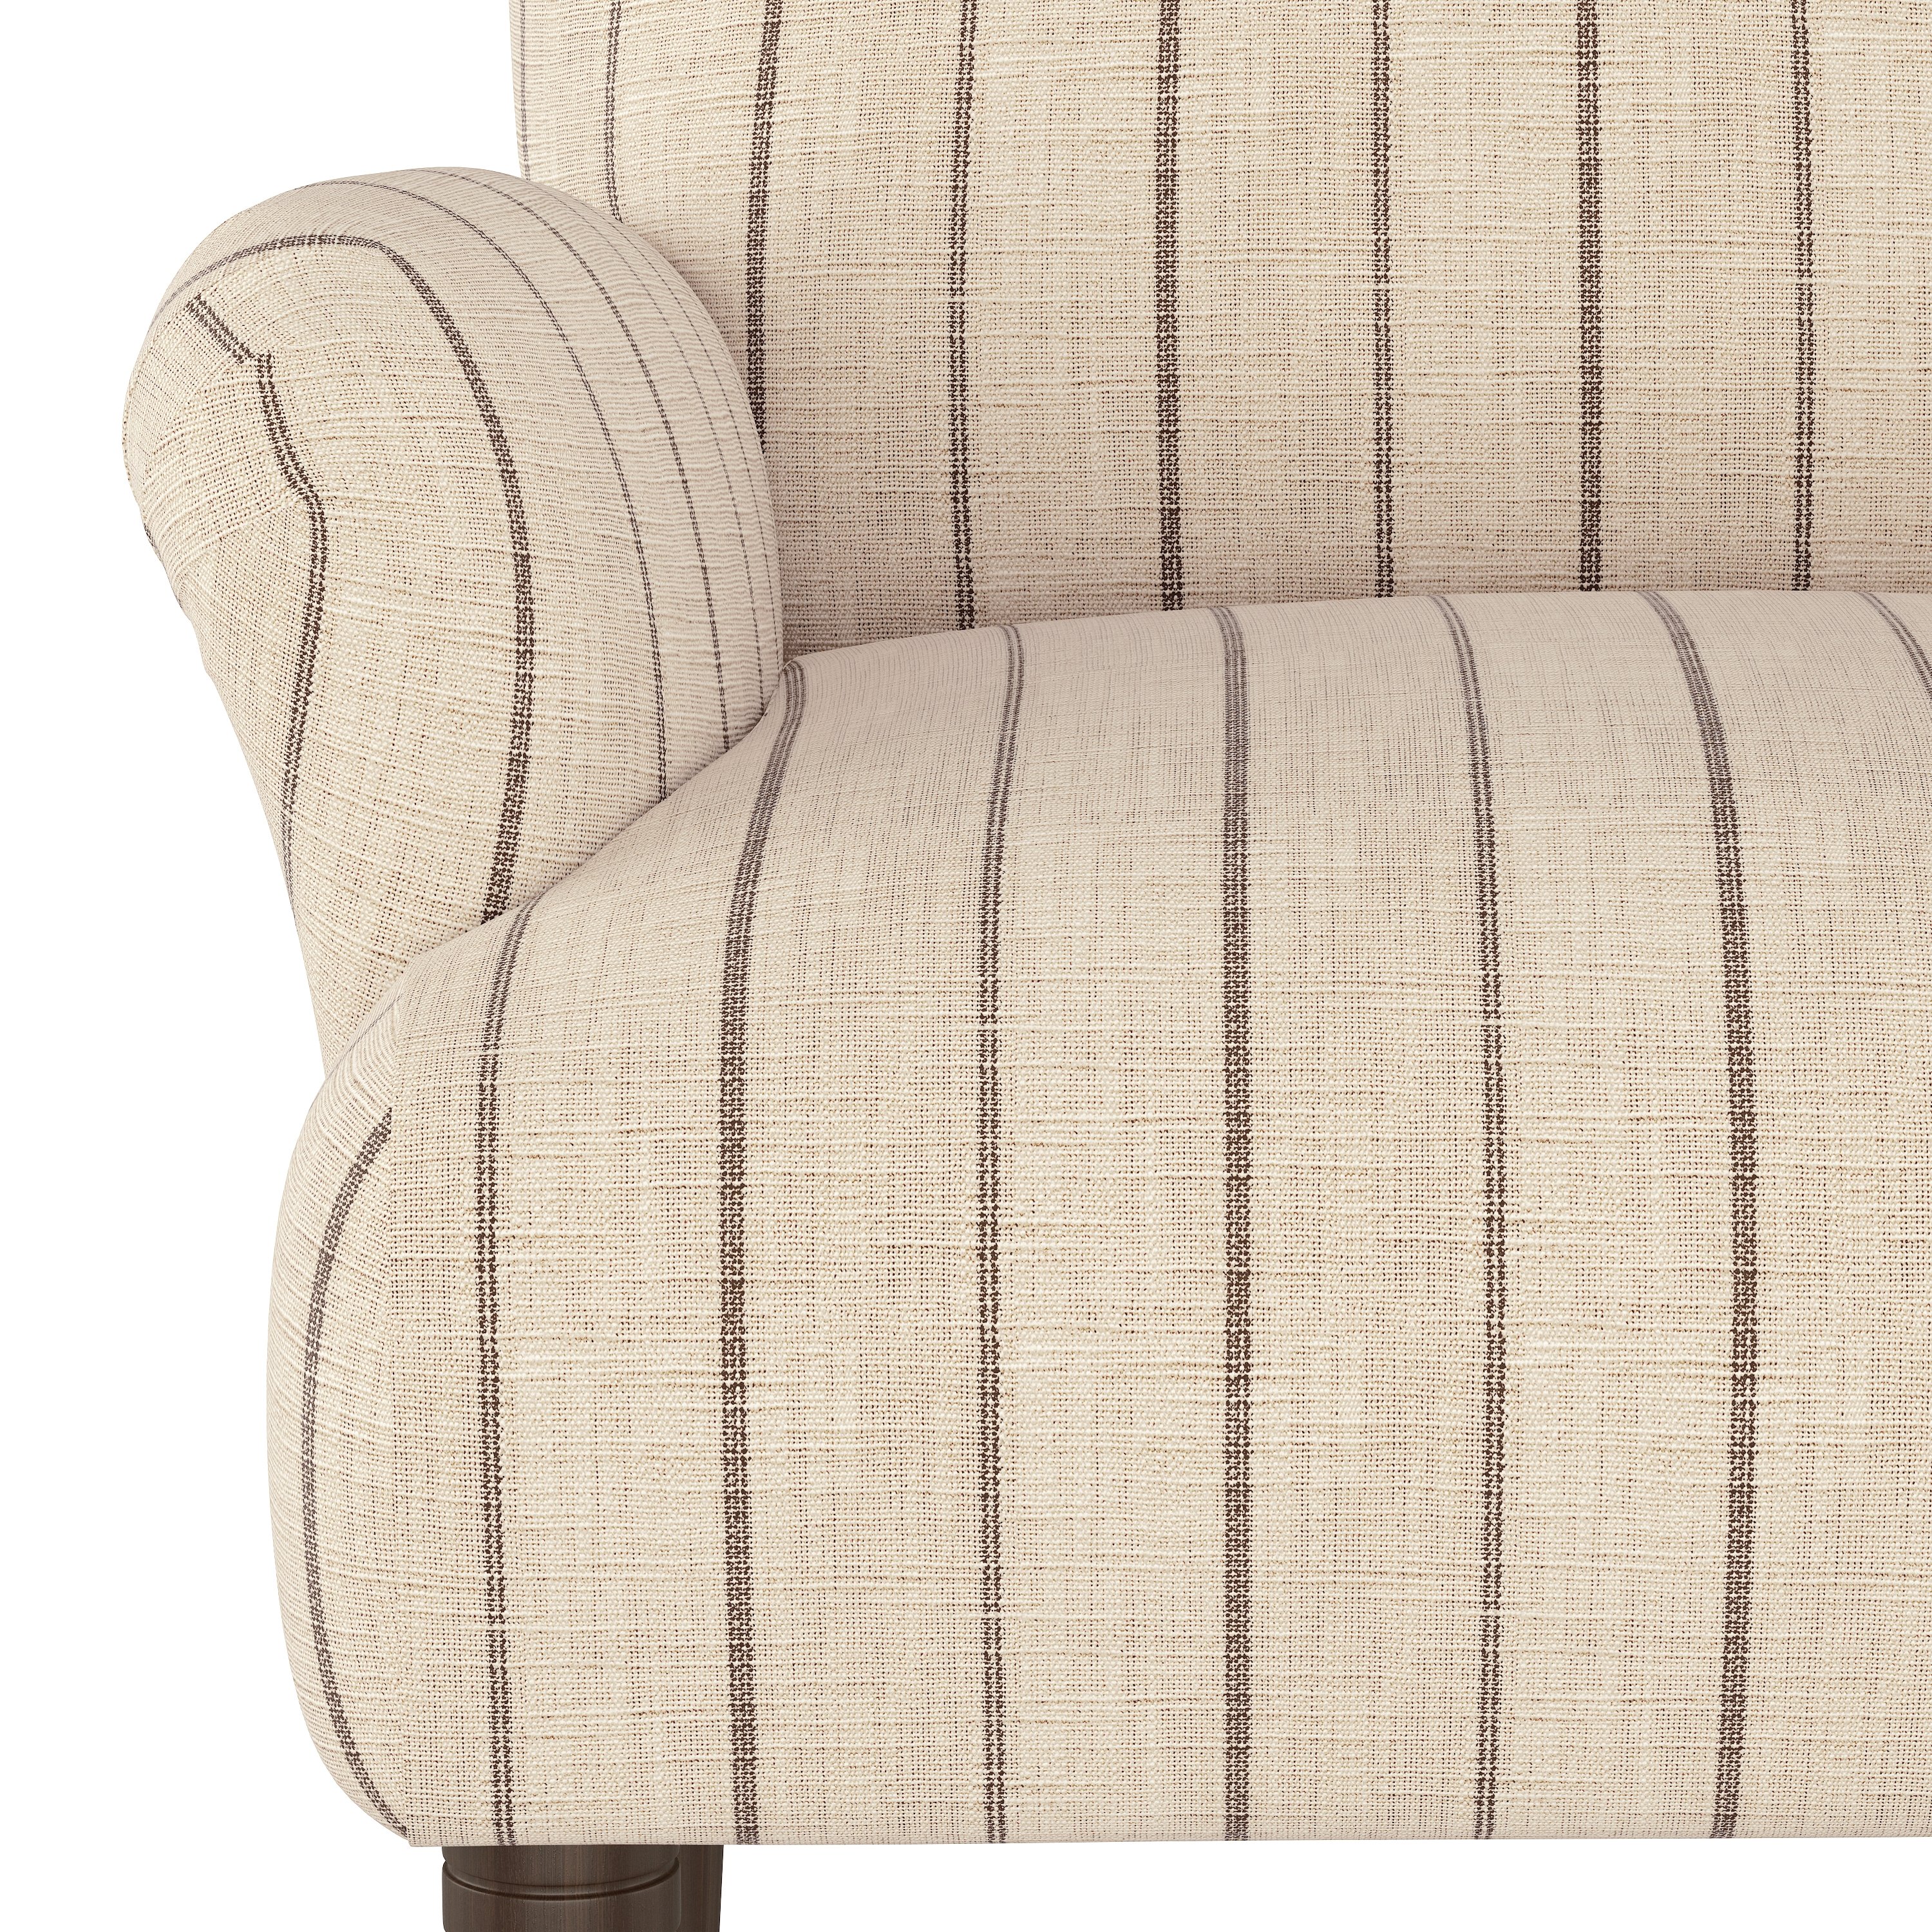 Vyolet Accent Chair - Image 4